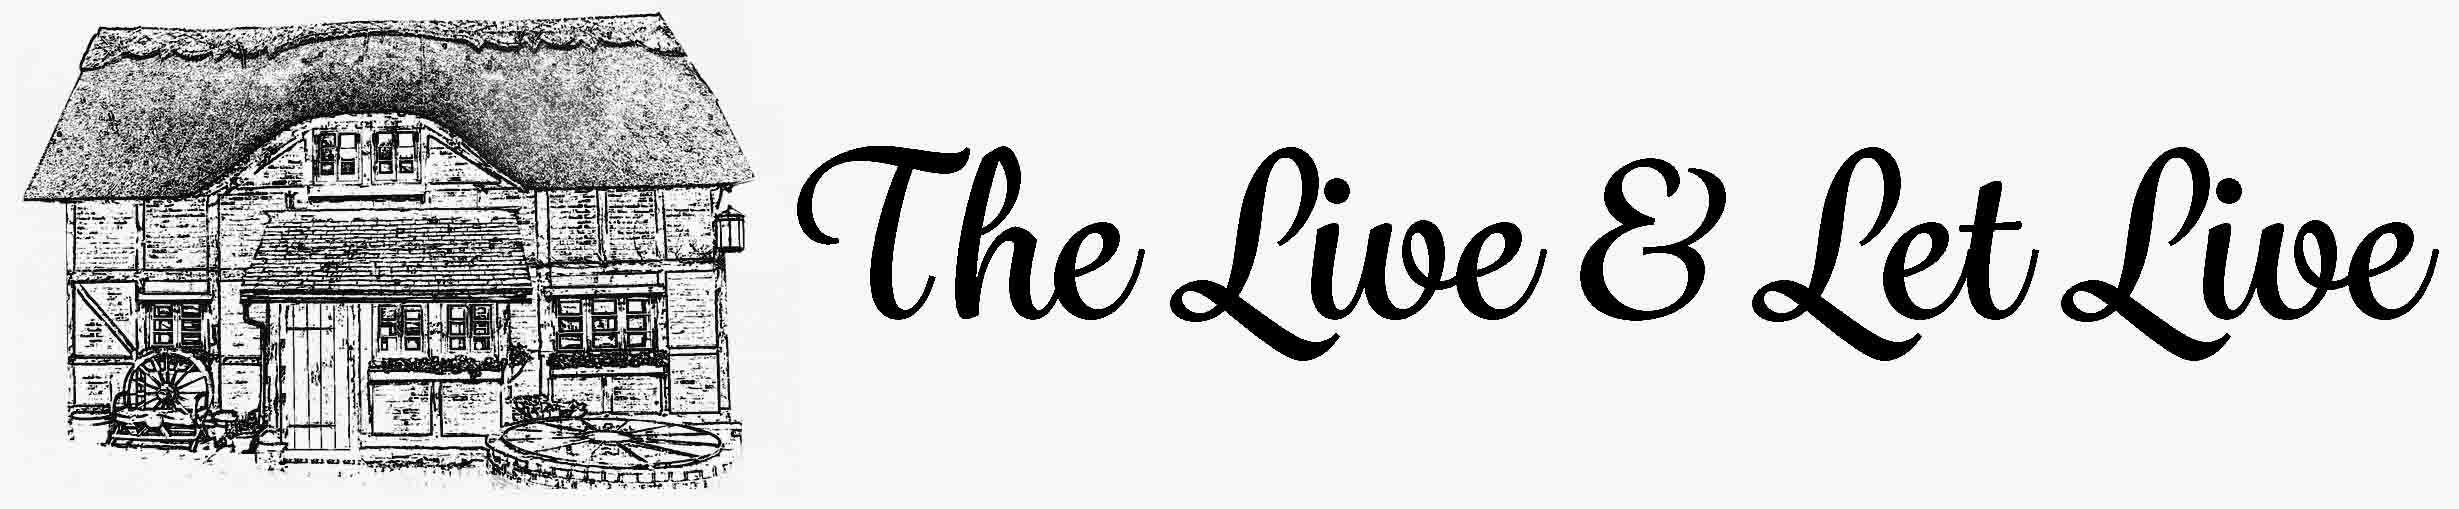 The Live and let Live